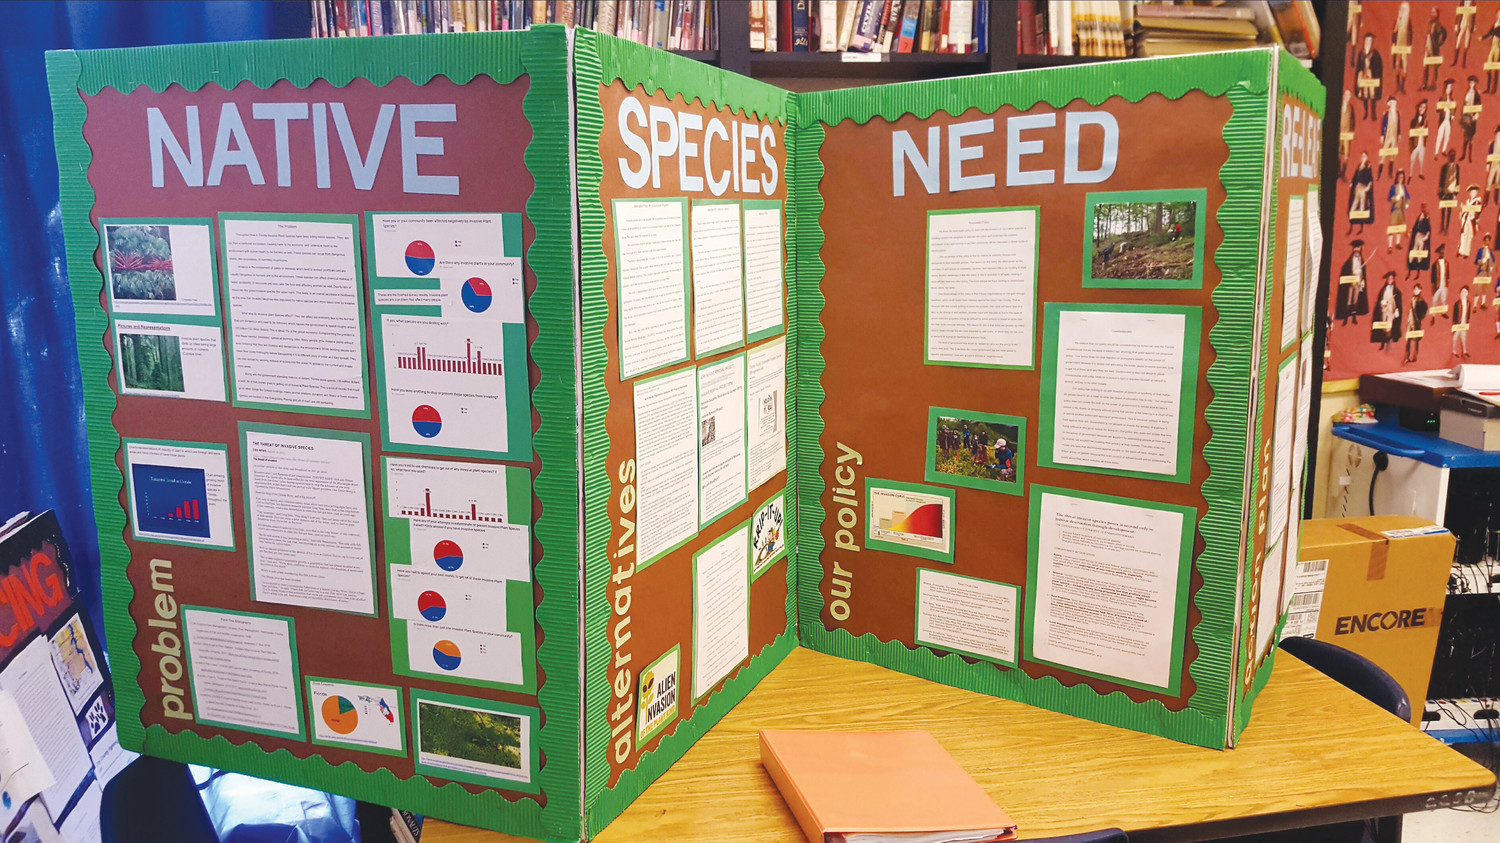 Titled “Native Species Need Relief,” judges ultimately chose the project on invasive plant species in Florida to be presented to legislators.